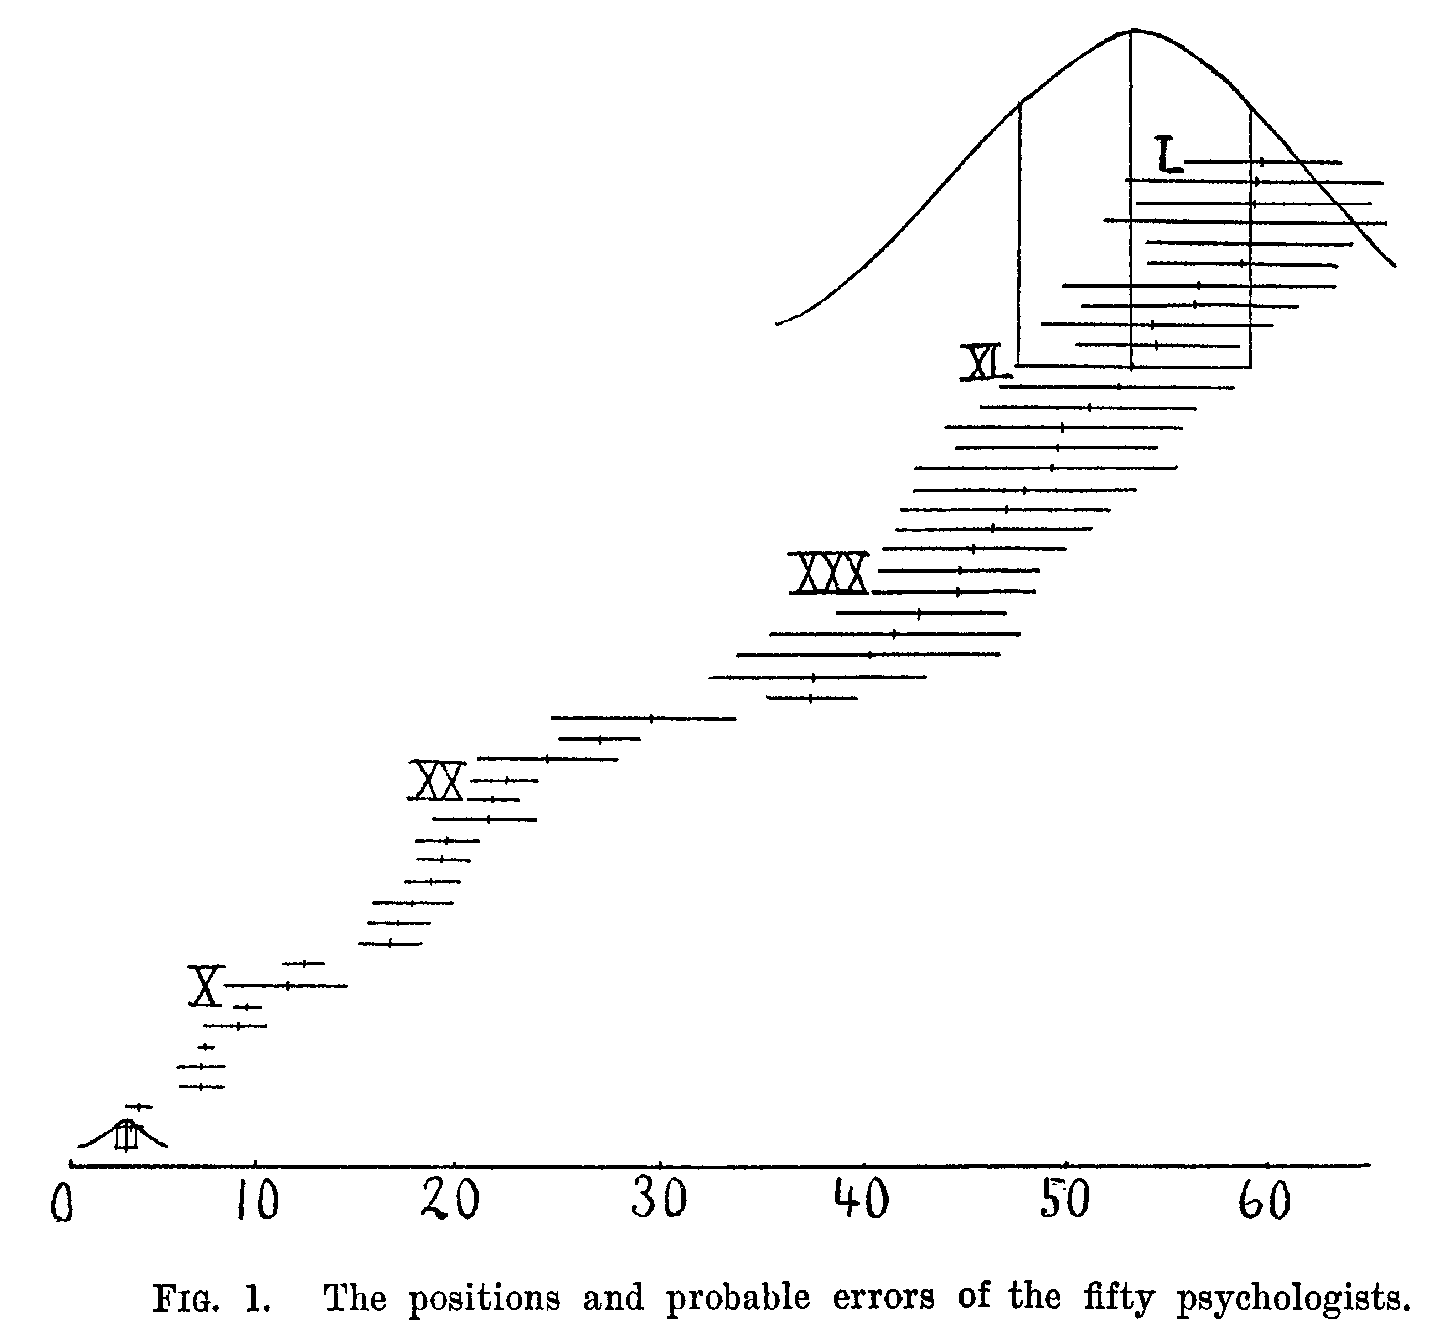 Fig 1, the positions and probable errors of the fifty psychologists